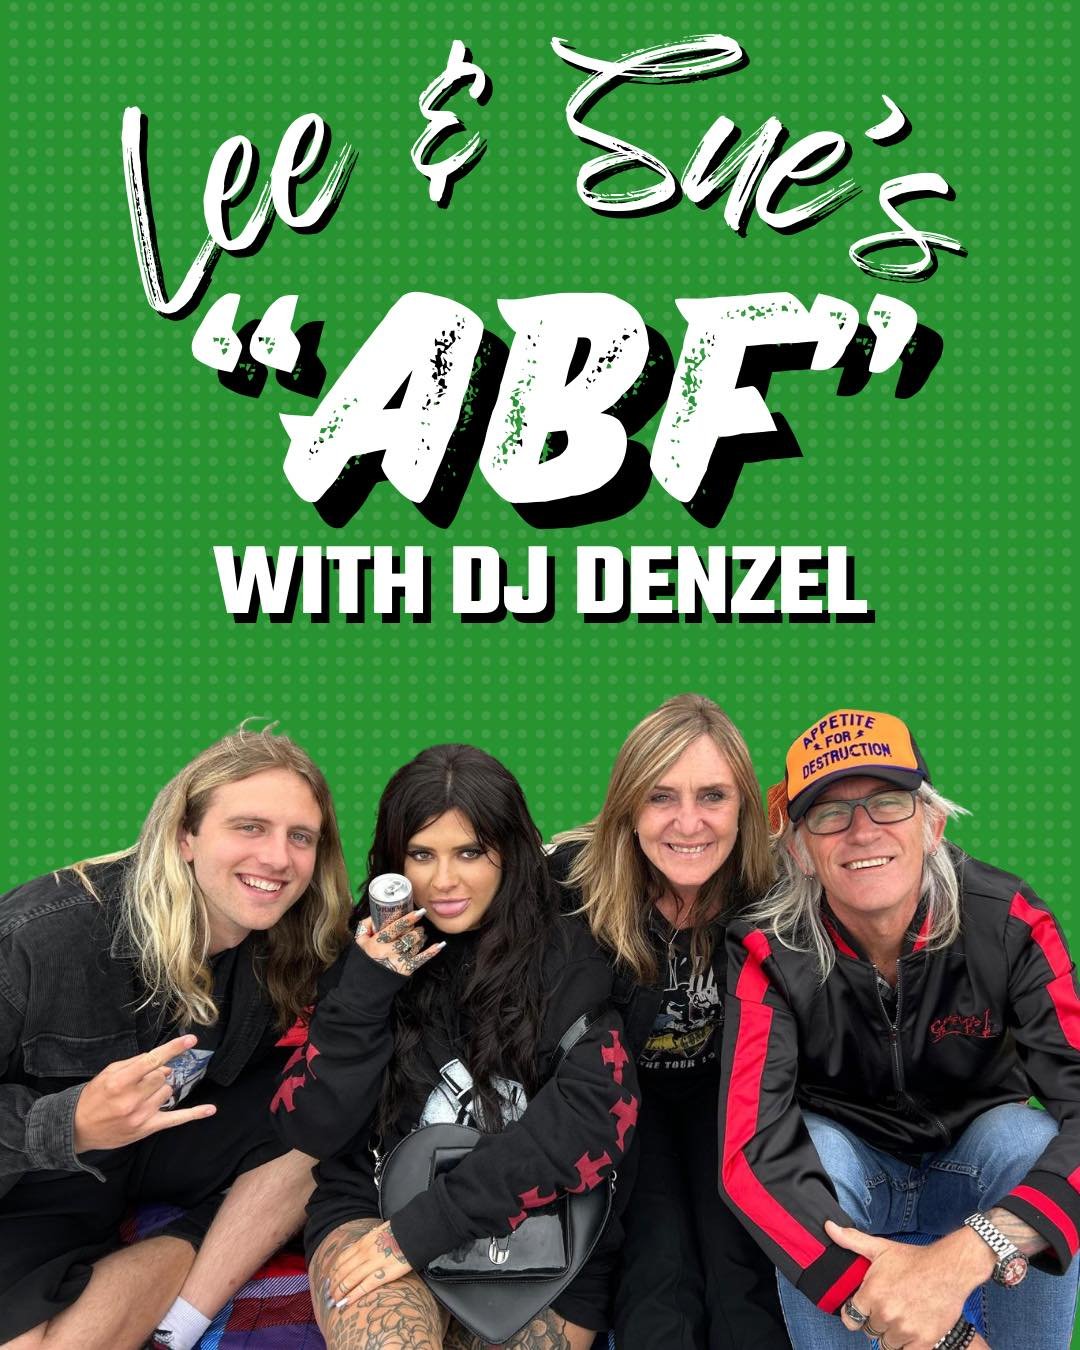 Join us this Friday night at the Royal Oak for Lee and Sue's ABF! 🎉 It's your last chance to catch them here, so don't miss out. Plus, DJ Denzel will be spinning tunes all night long! 

#RoyalOak #ABF #FarewellParty #DJNight #FridayNight #EndOfAnEra